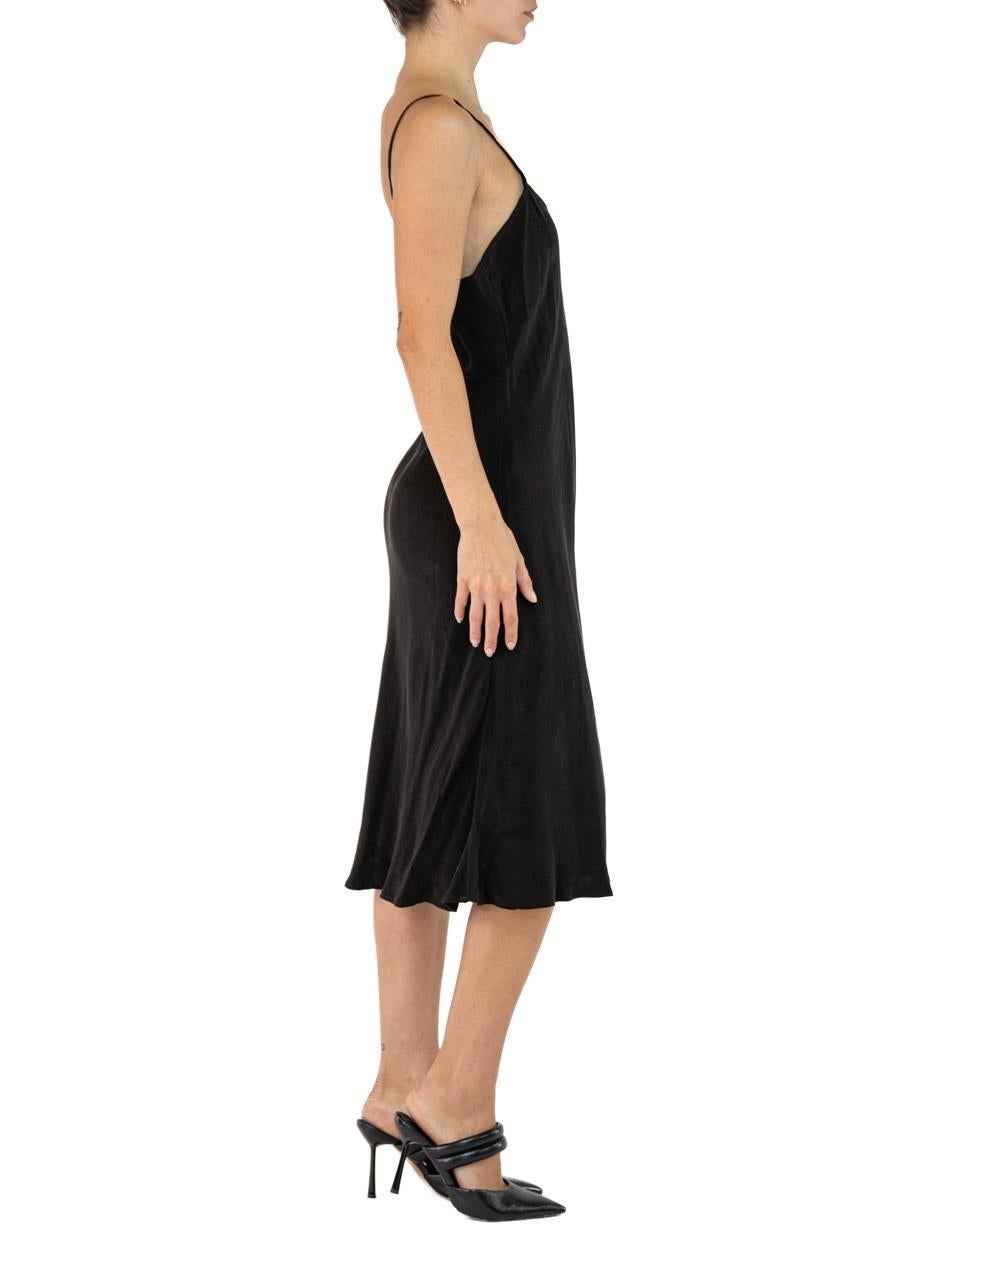 Morphew Collection Black Cold Rayon Bias Maxi Slip Dress Master Medium In Excellent Condition For Sale In New York, NY